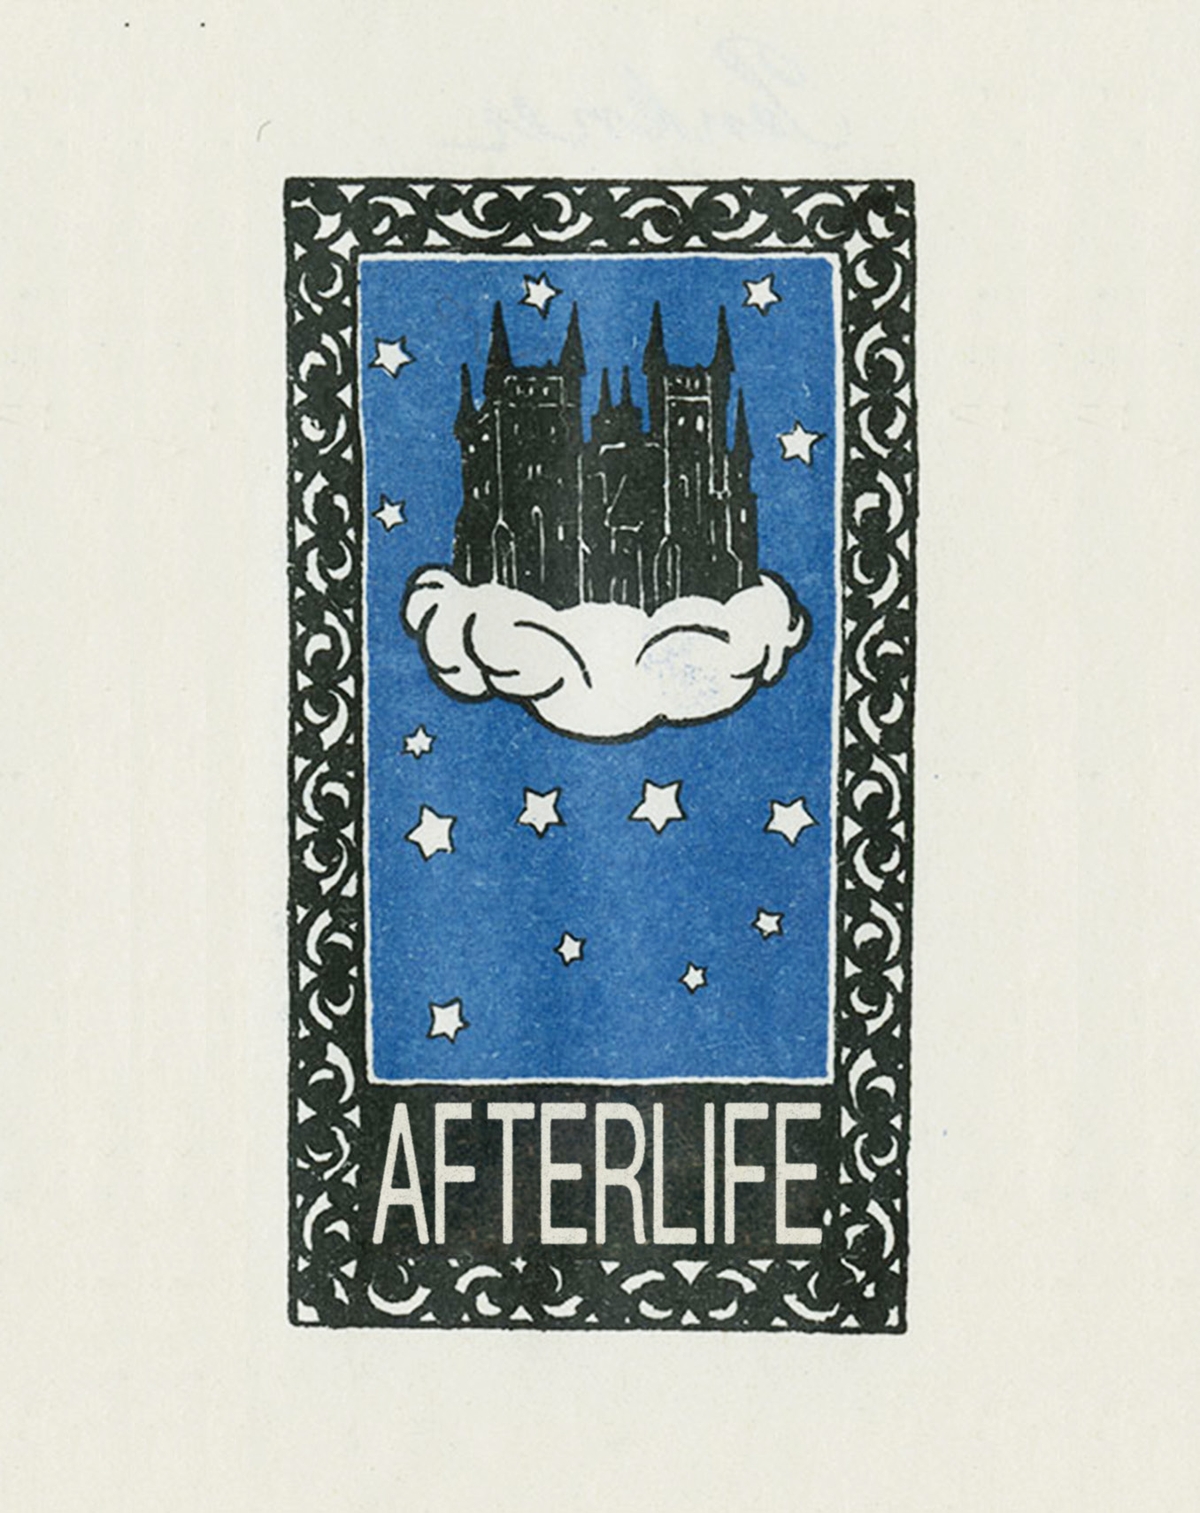 Afterlife - Design Graphic - Castle in the Sky | Atollon - a design company